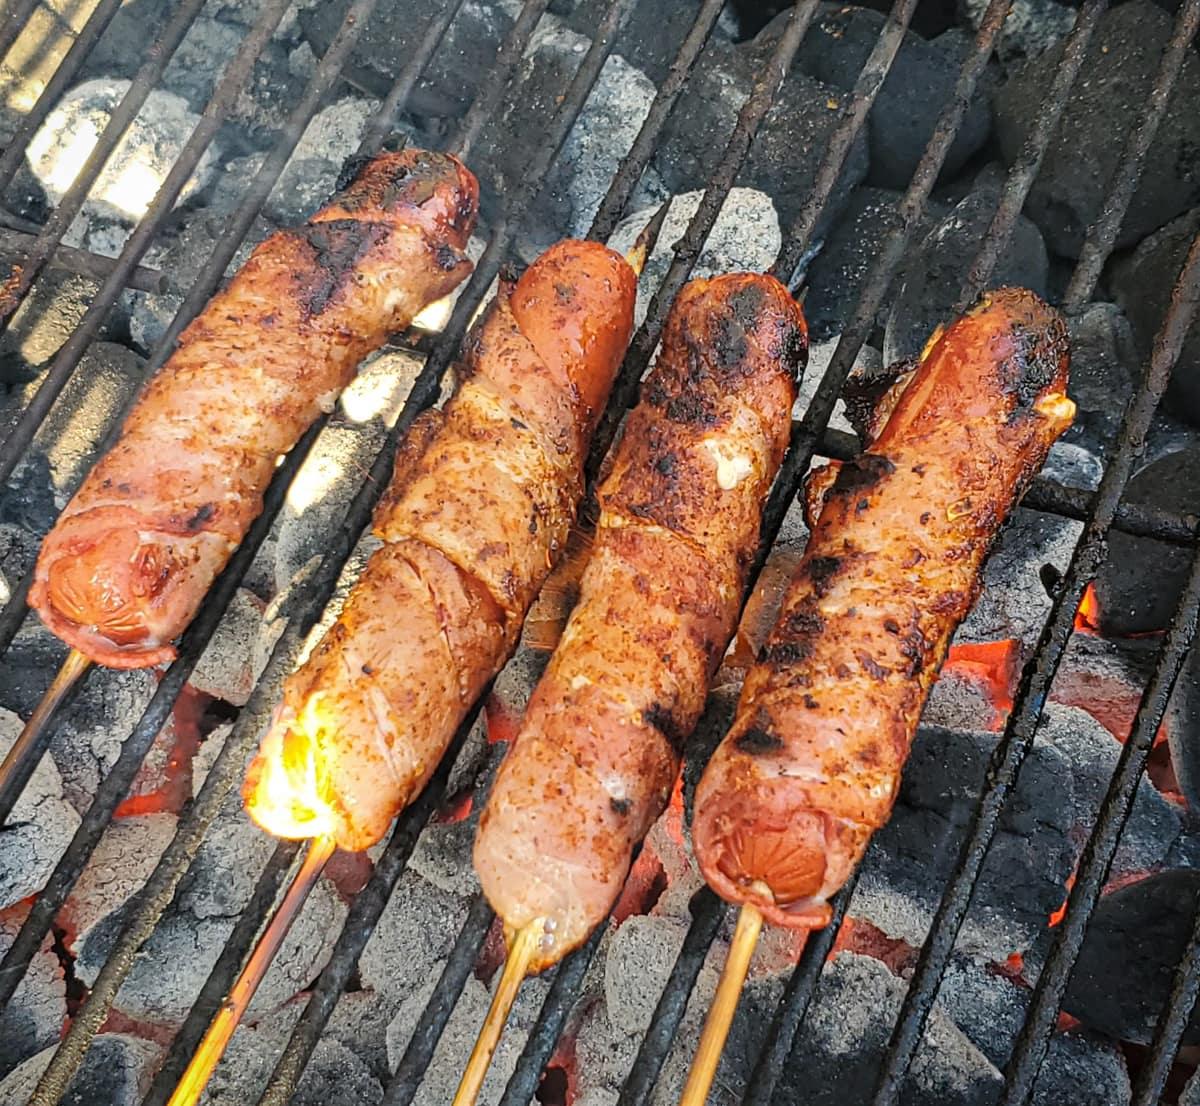 Bacon wrapped hotdogs on a grill.